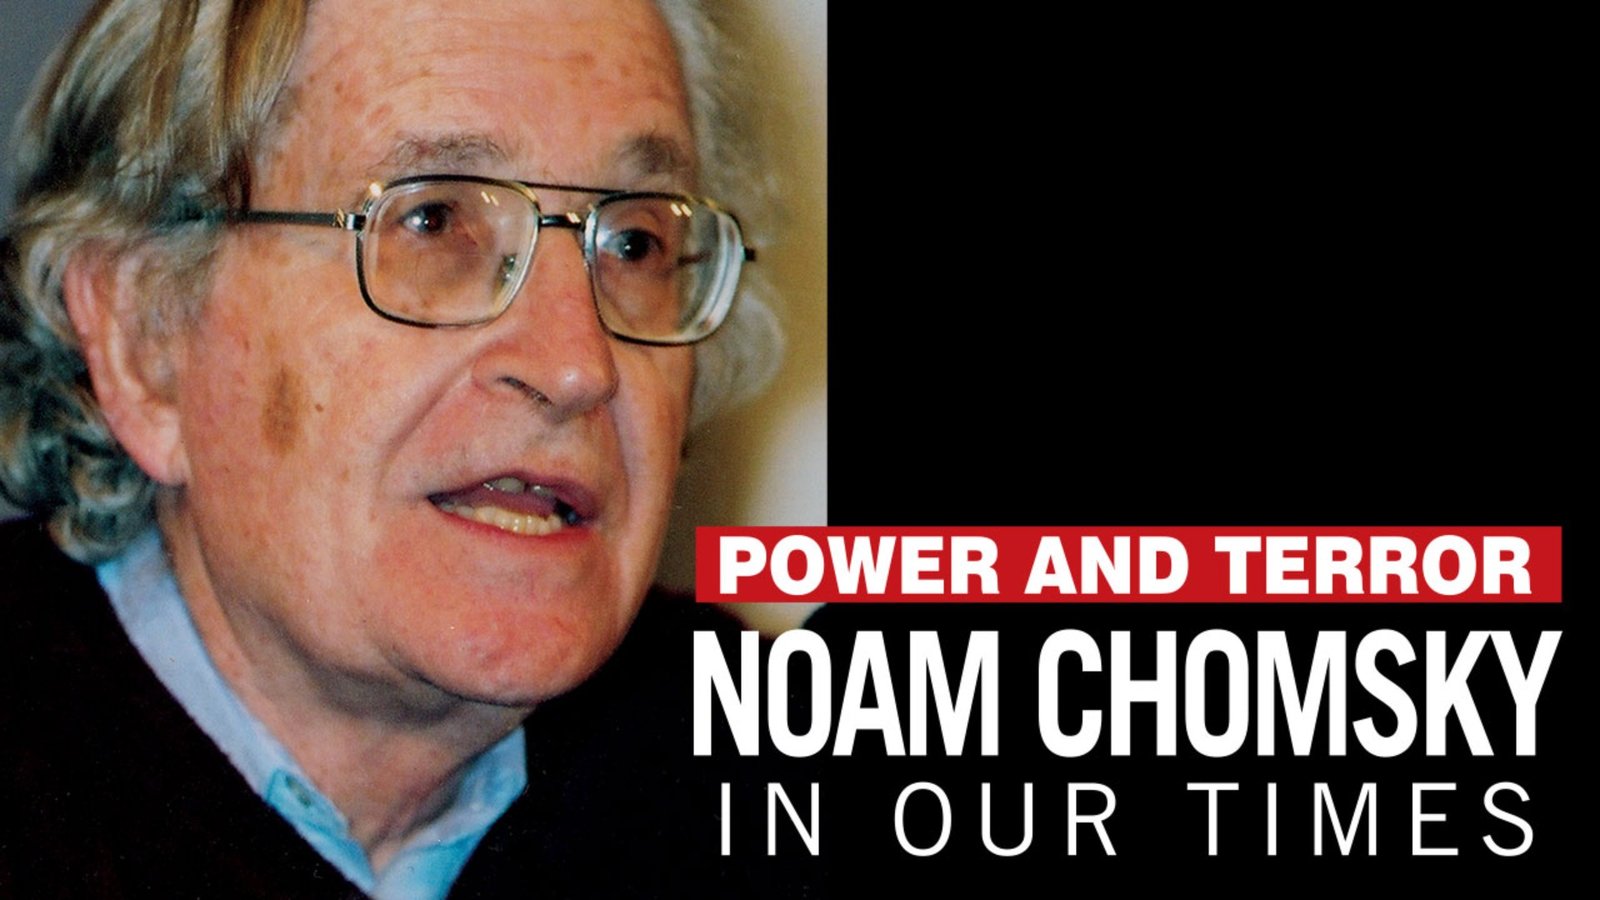 Power and Terror - Noam Chomsky in Our Times